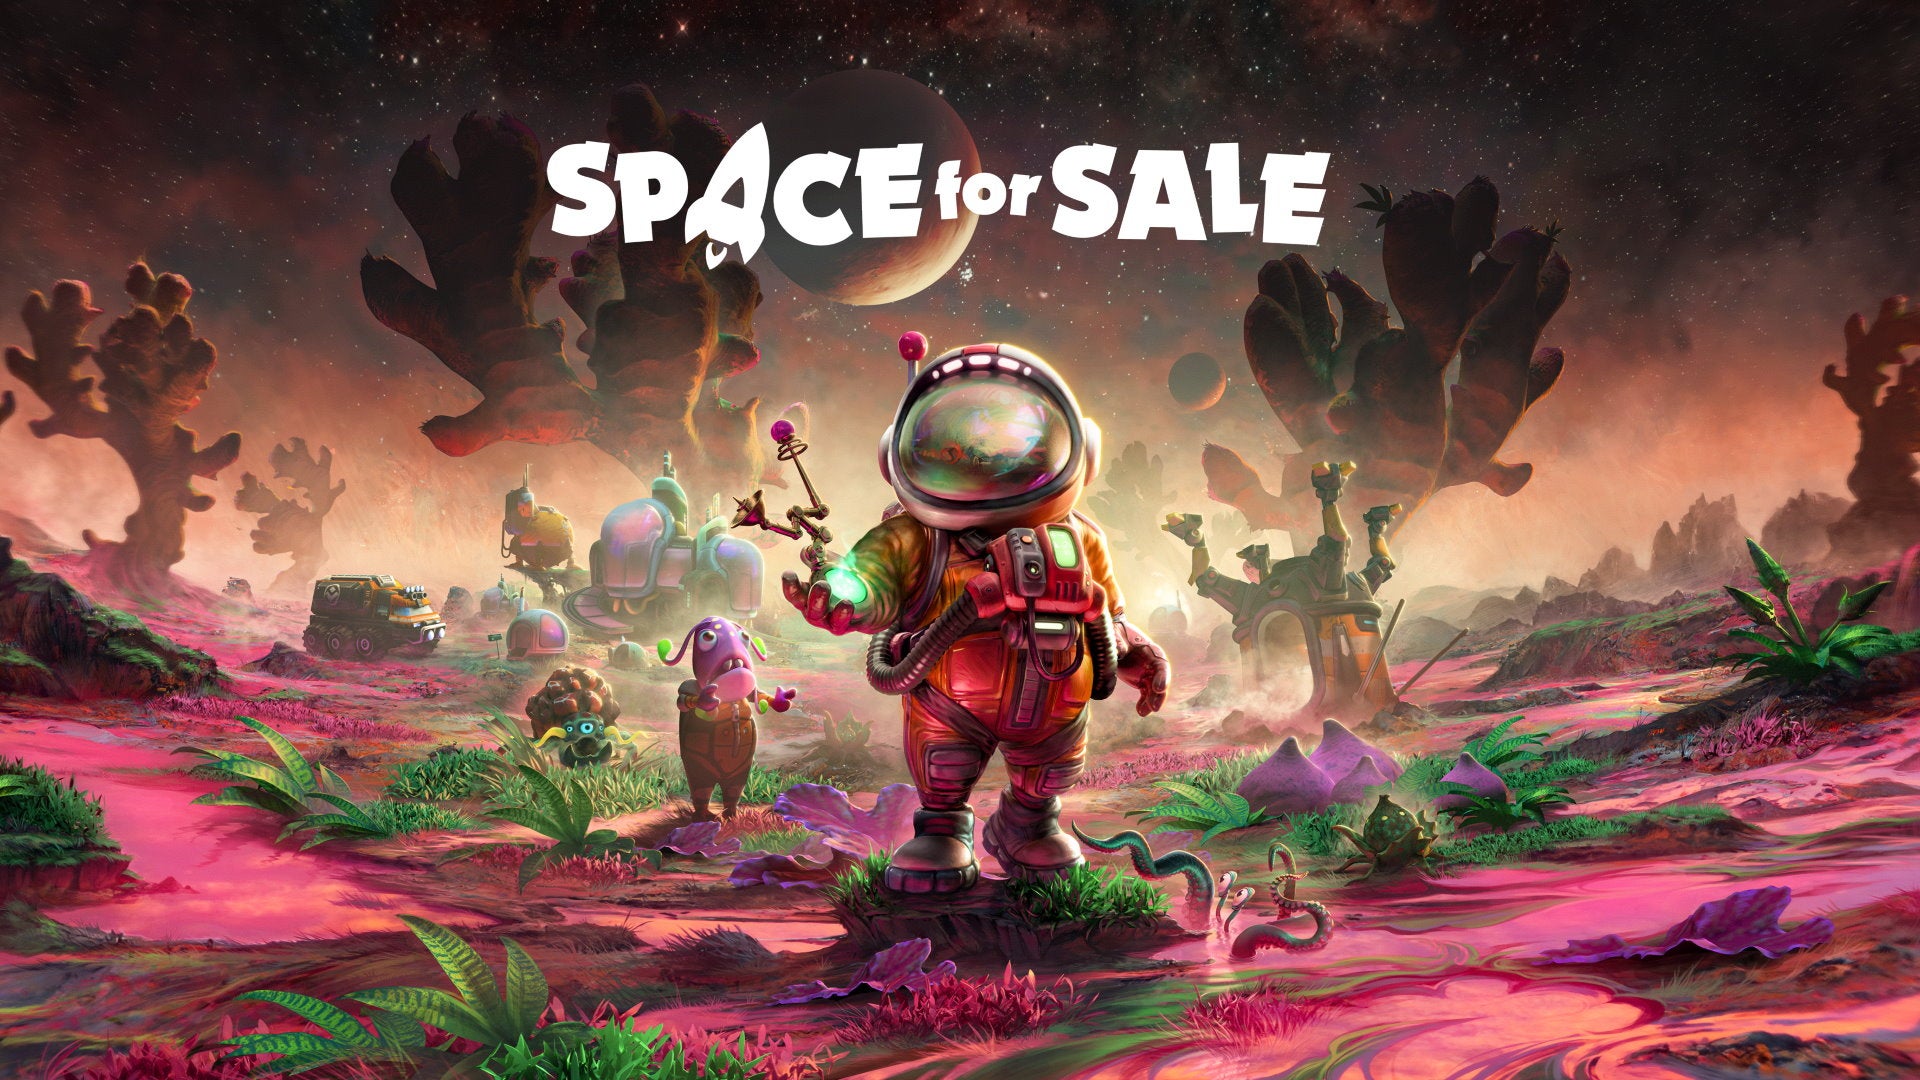 A small astronaut holds a glowing green gizmo on an alien planet in Space For Sale